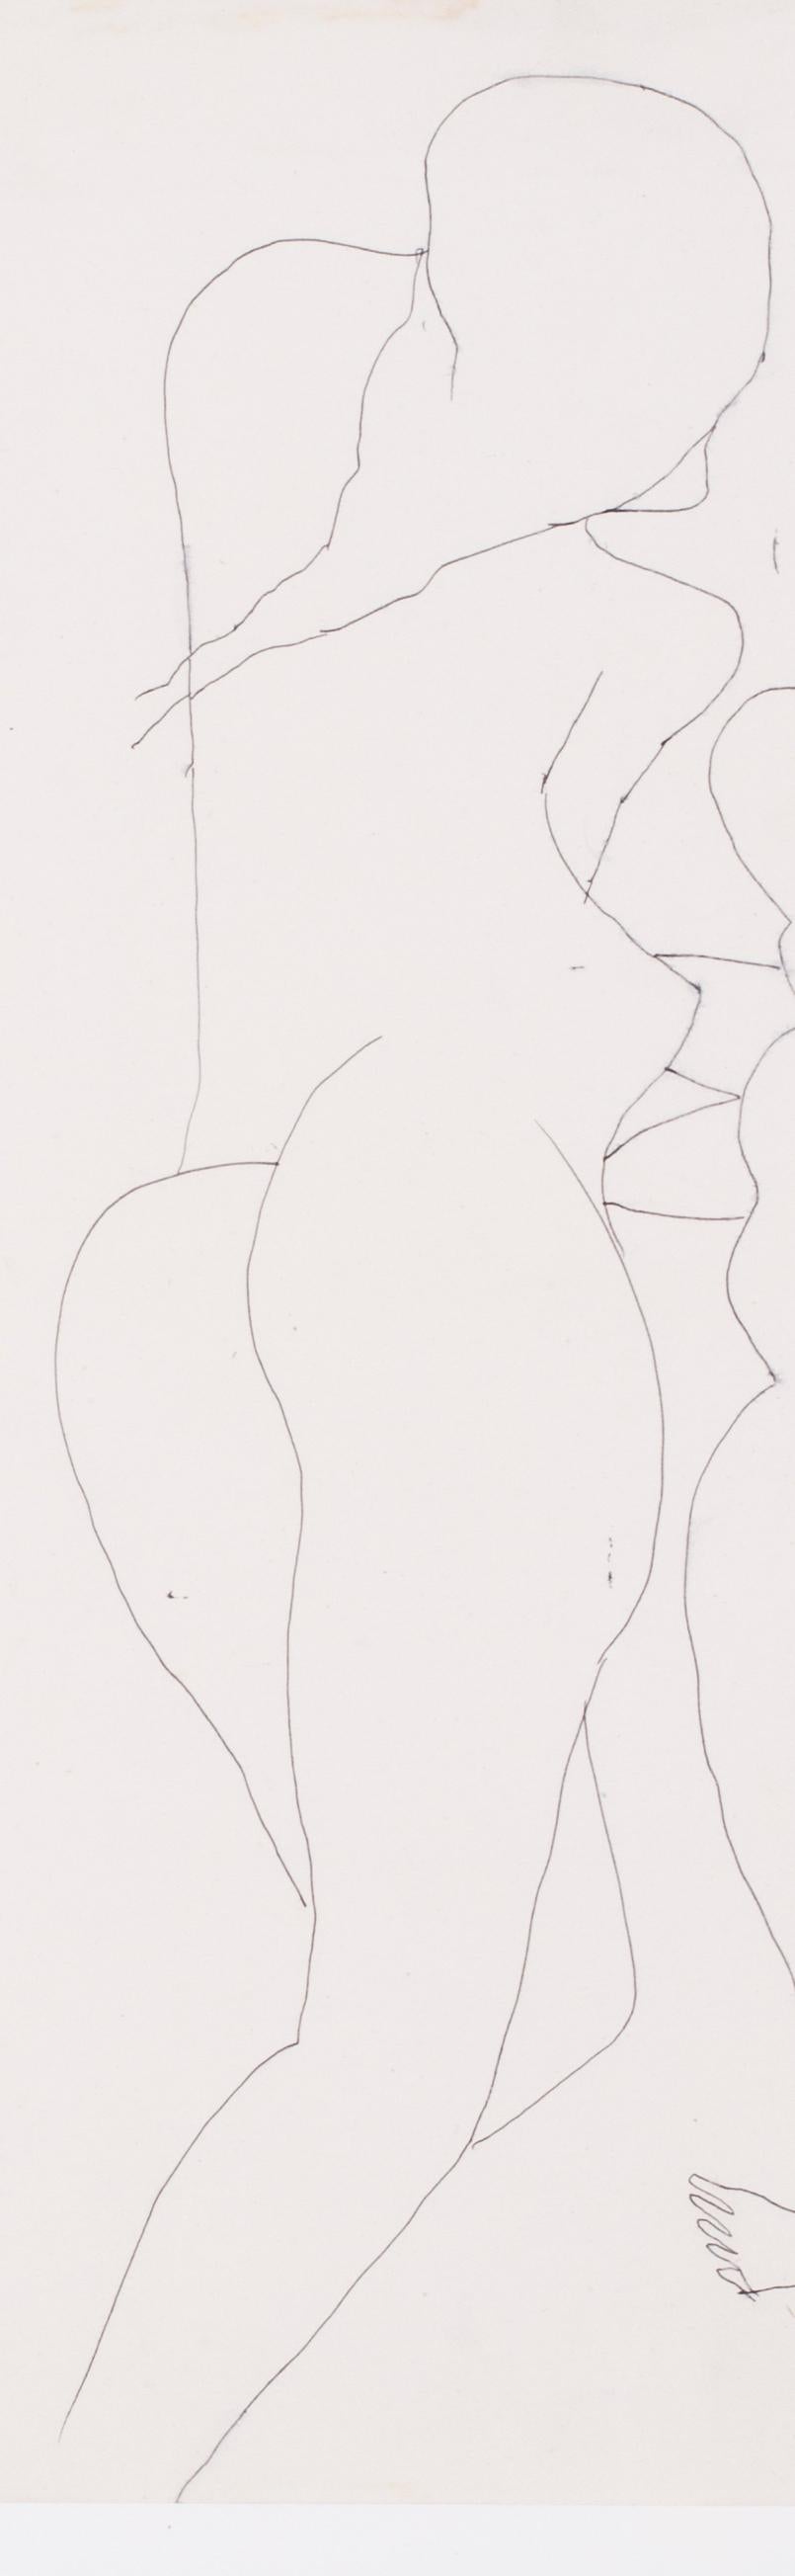 A 20th Century abstract drawing of female nudes by Indian artist F. N. Souza 2